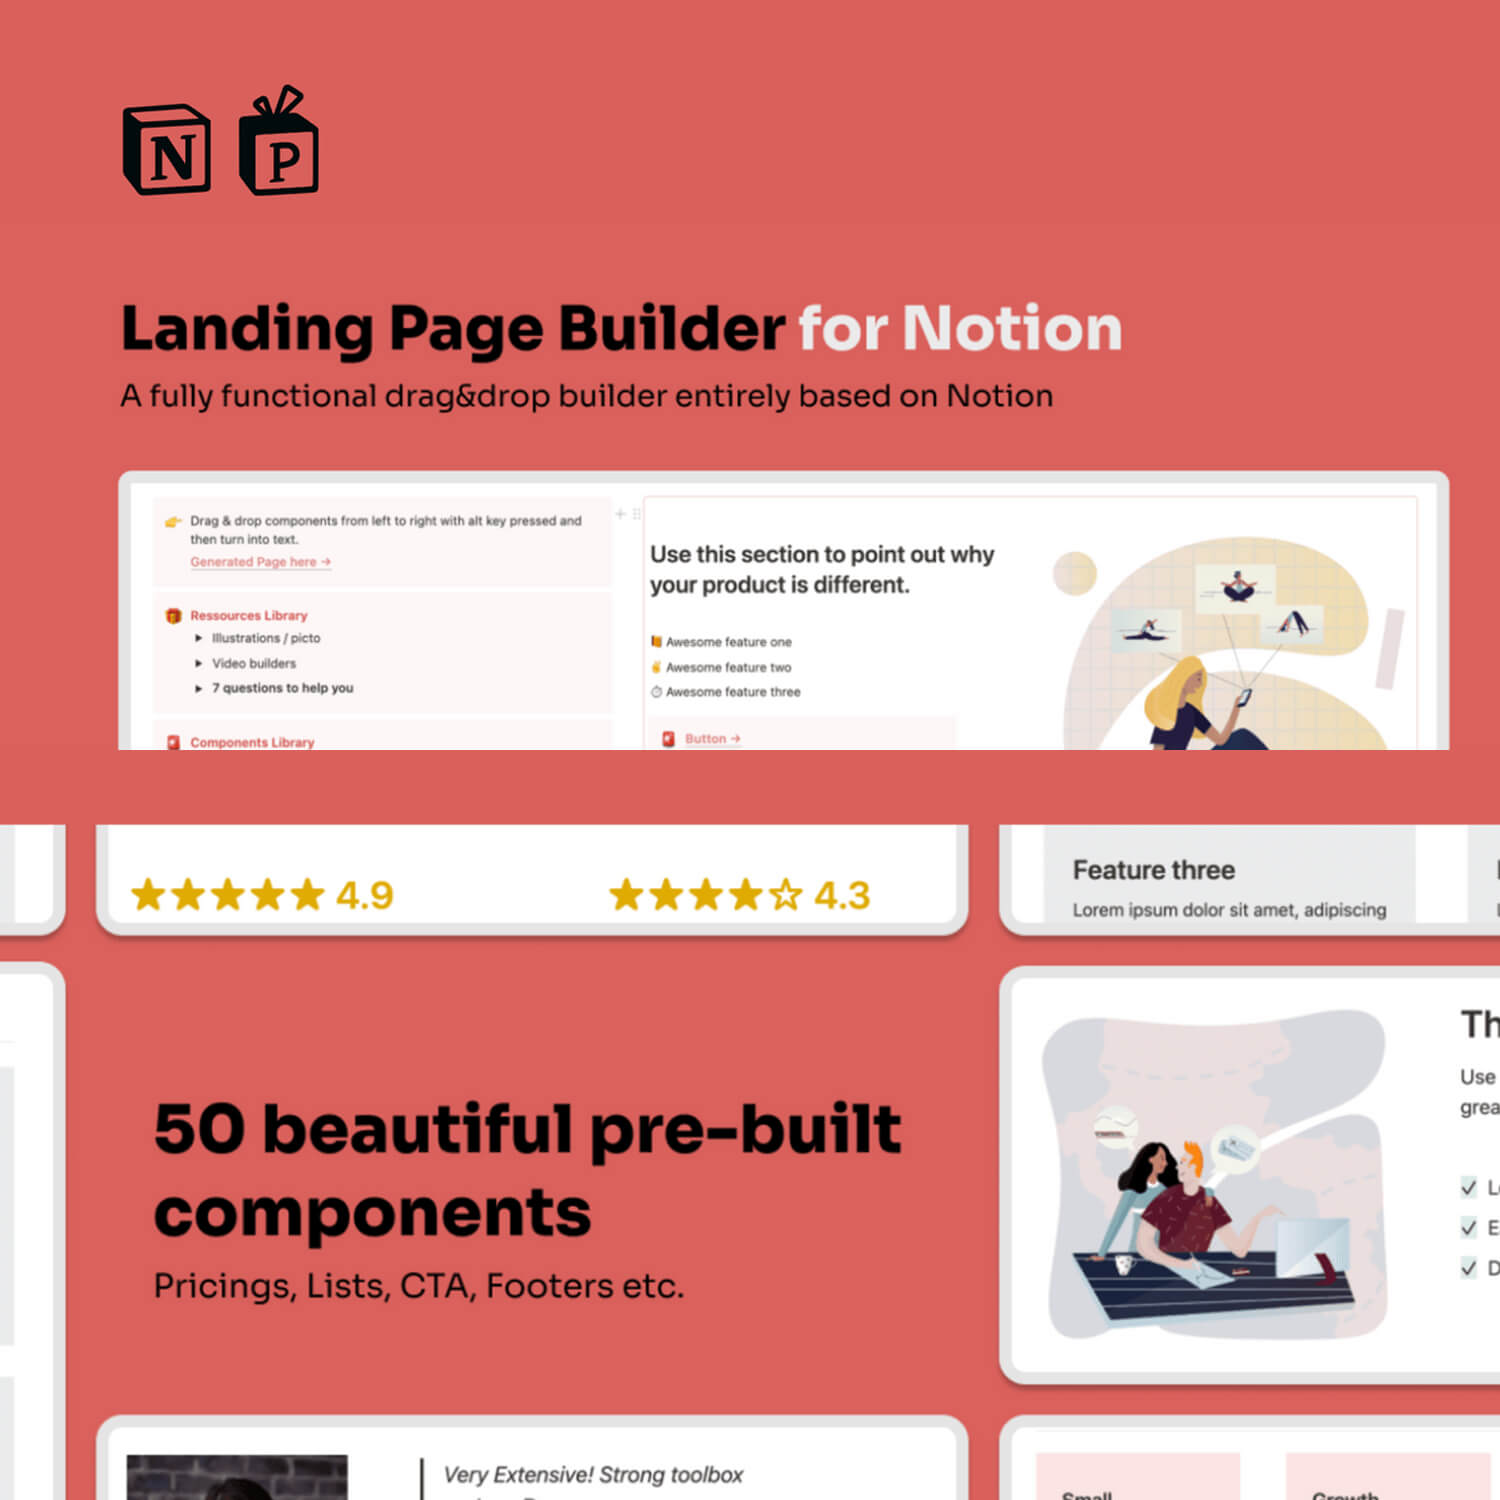 Landing Page Builder for Notion.